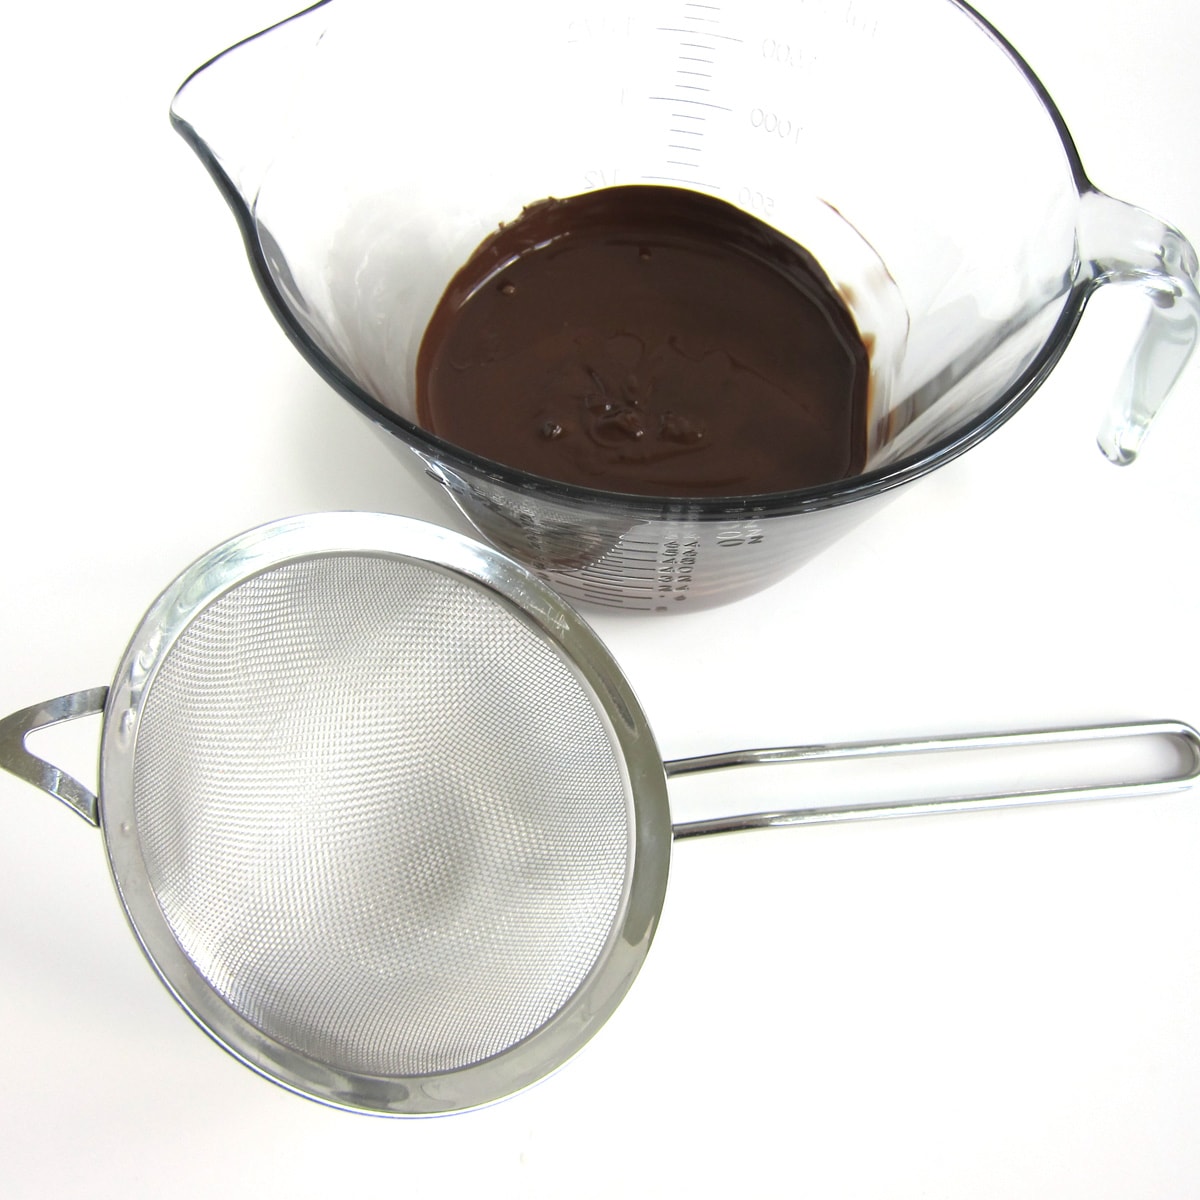 melted chocolate in a mixing bowl set next to a fine mesh sieve